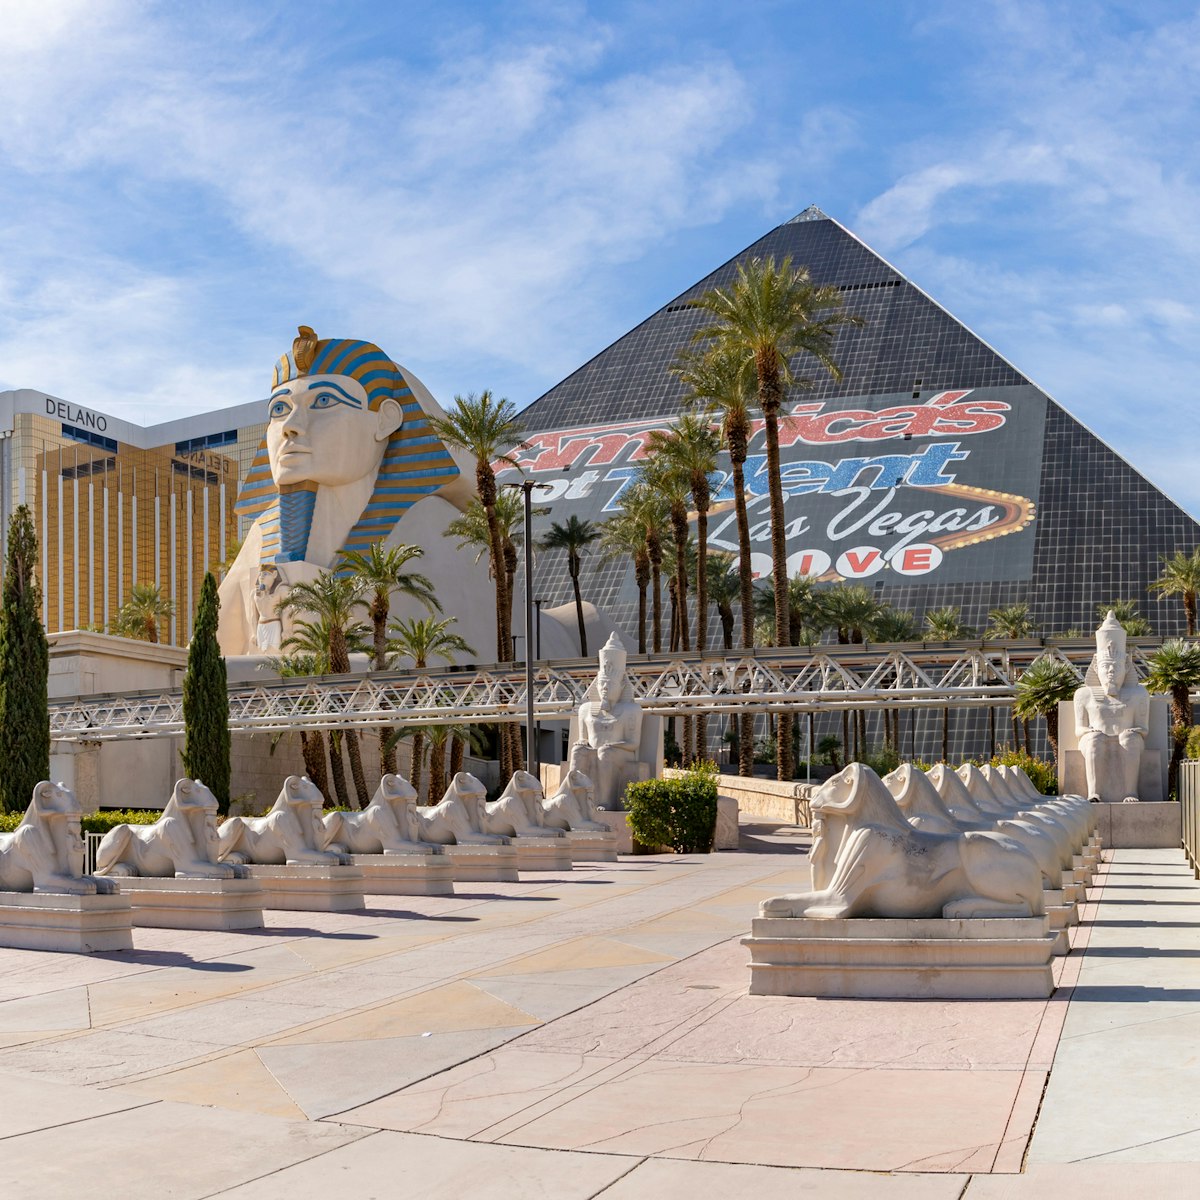 Las Vegas, United States - November 23, 2022: A picture of the Luxor Hotel and Casino.
1482858774
america, betting, building, casinos, delano, egyptian, entertainment, hotels, luxor, palm trees, pavement, rail, sculptures, show, sin city, statues, trees, united states, united states of america, vegas